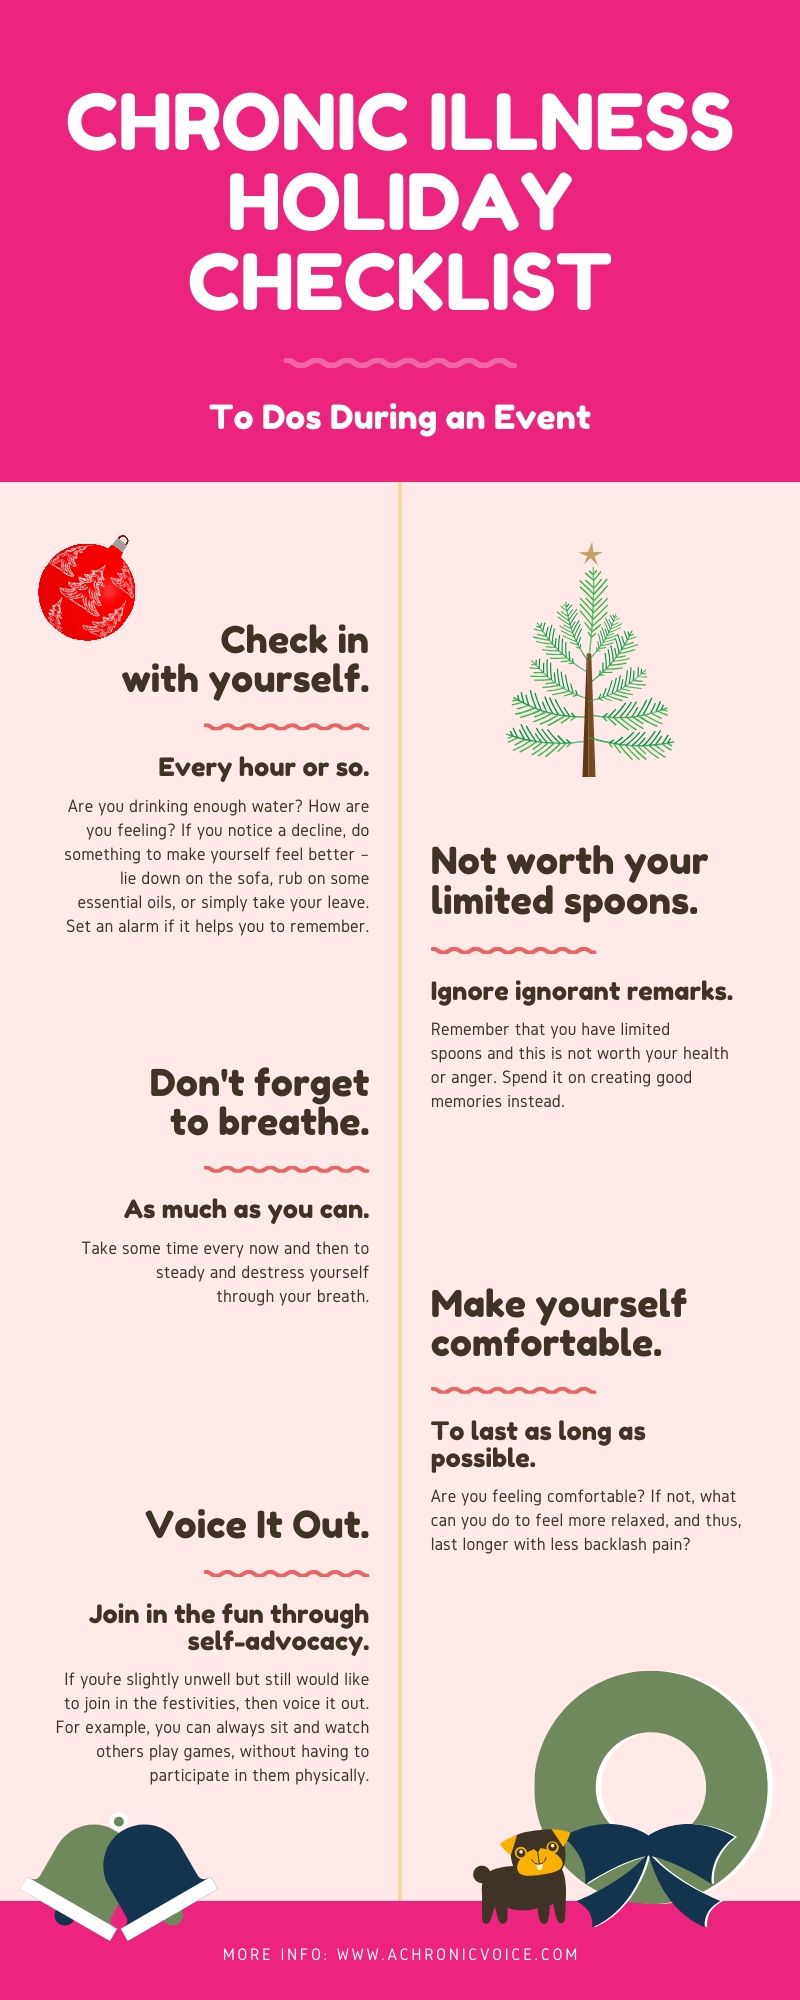 [Infographic] Chronic Illness Checklist Checklists - Self-Care During an Event